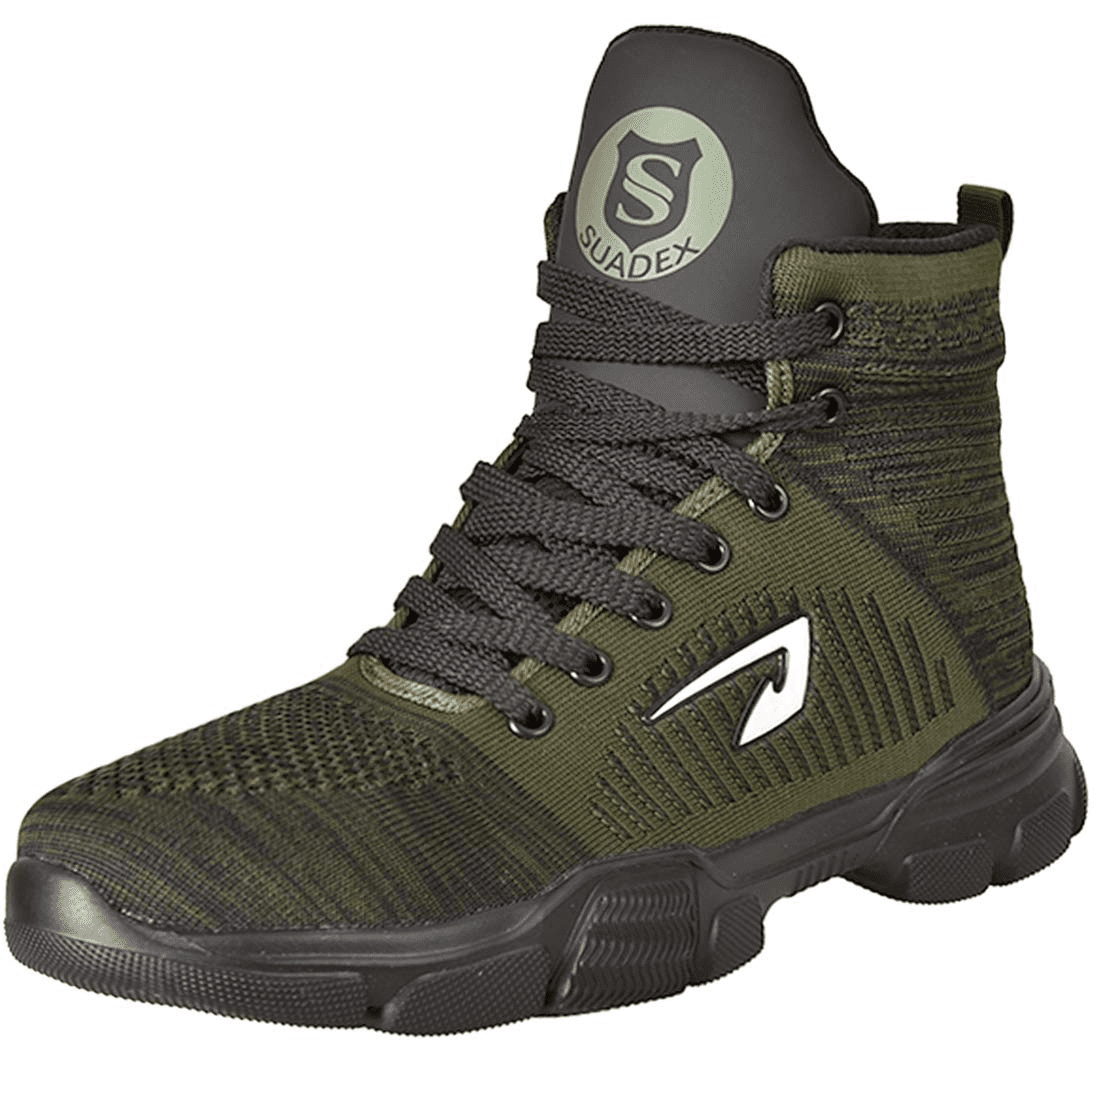 Mens Womens ESD Work Safety Shoes Steel Toe Boots Indestructible Hiking Sneakers 